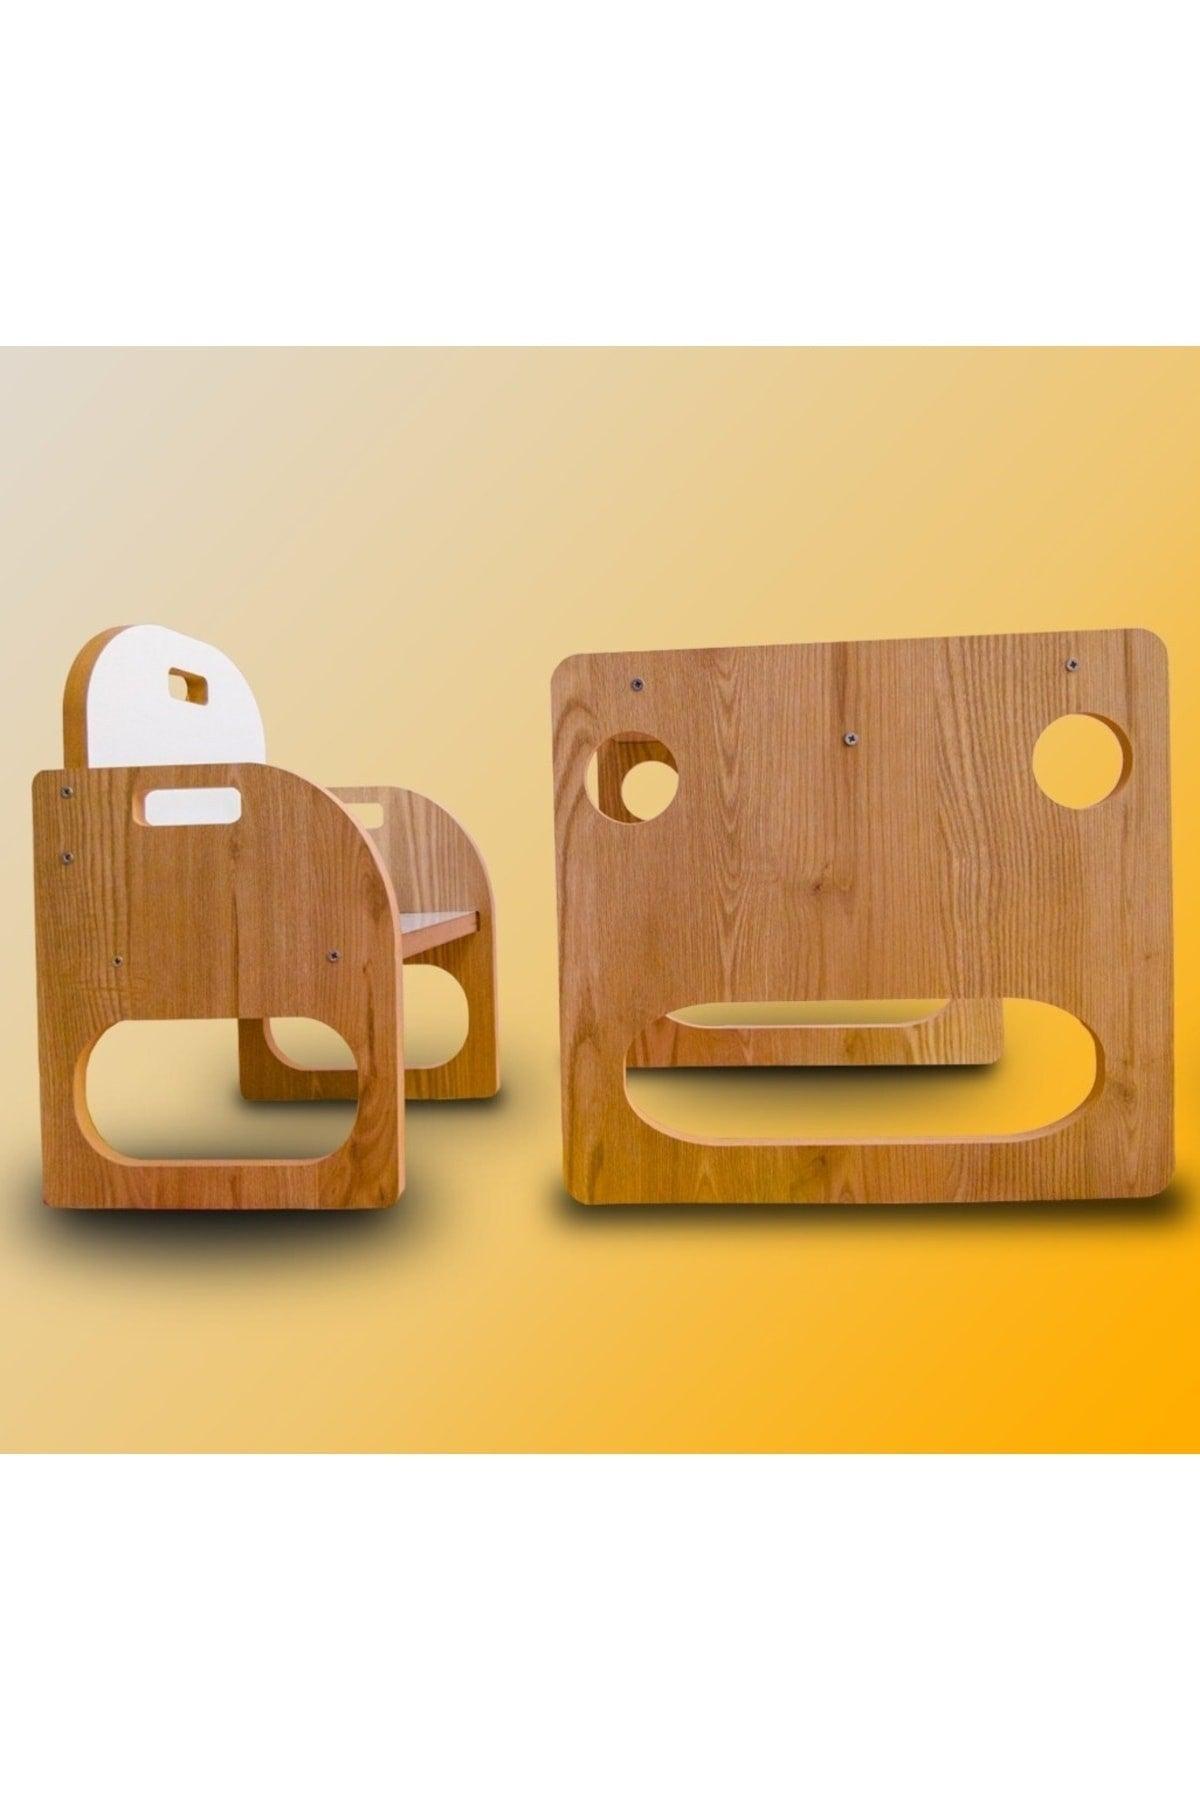 Customizable Kids Table And Chair Set /event Table / Wooden Kids Furniture - Swordslife